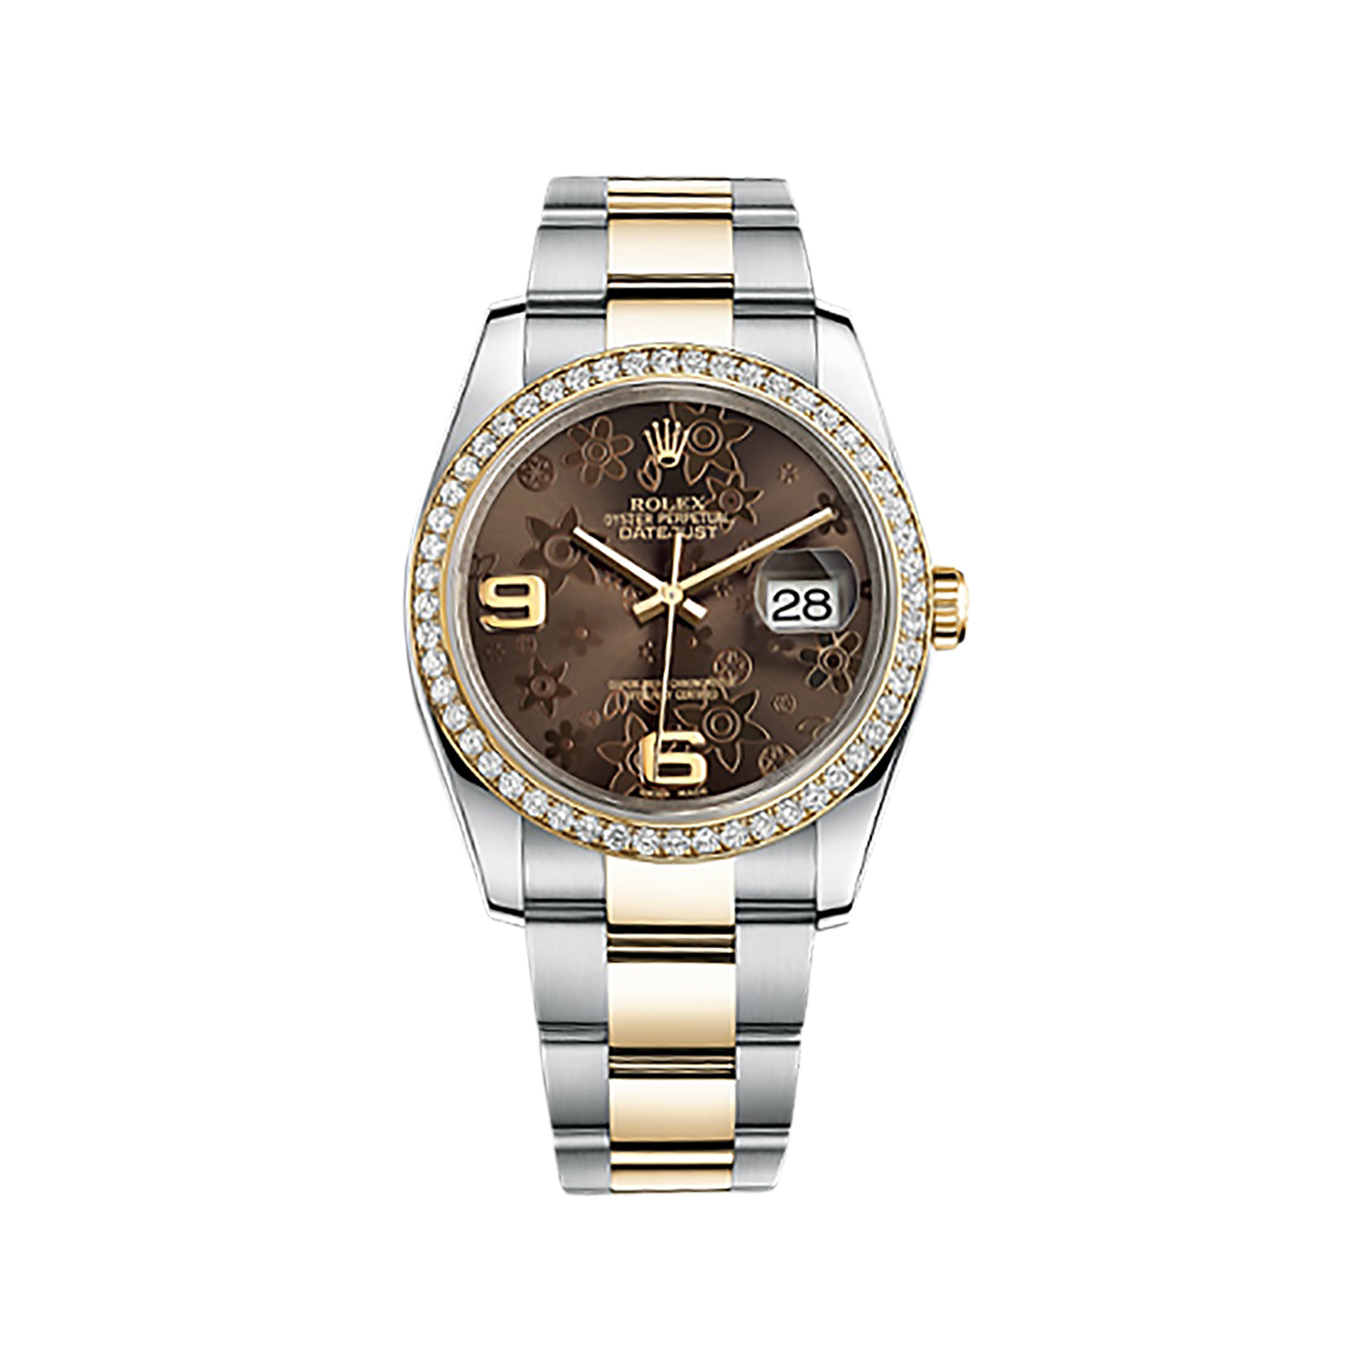 Datejust 36 116243 Gold & Stainless Steel Watch (Bronze Floral Motif)